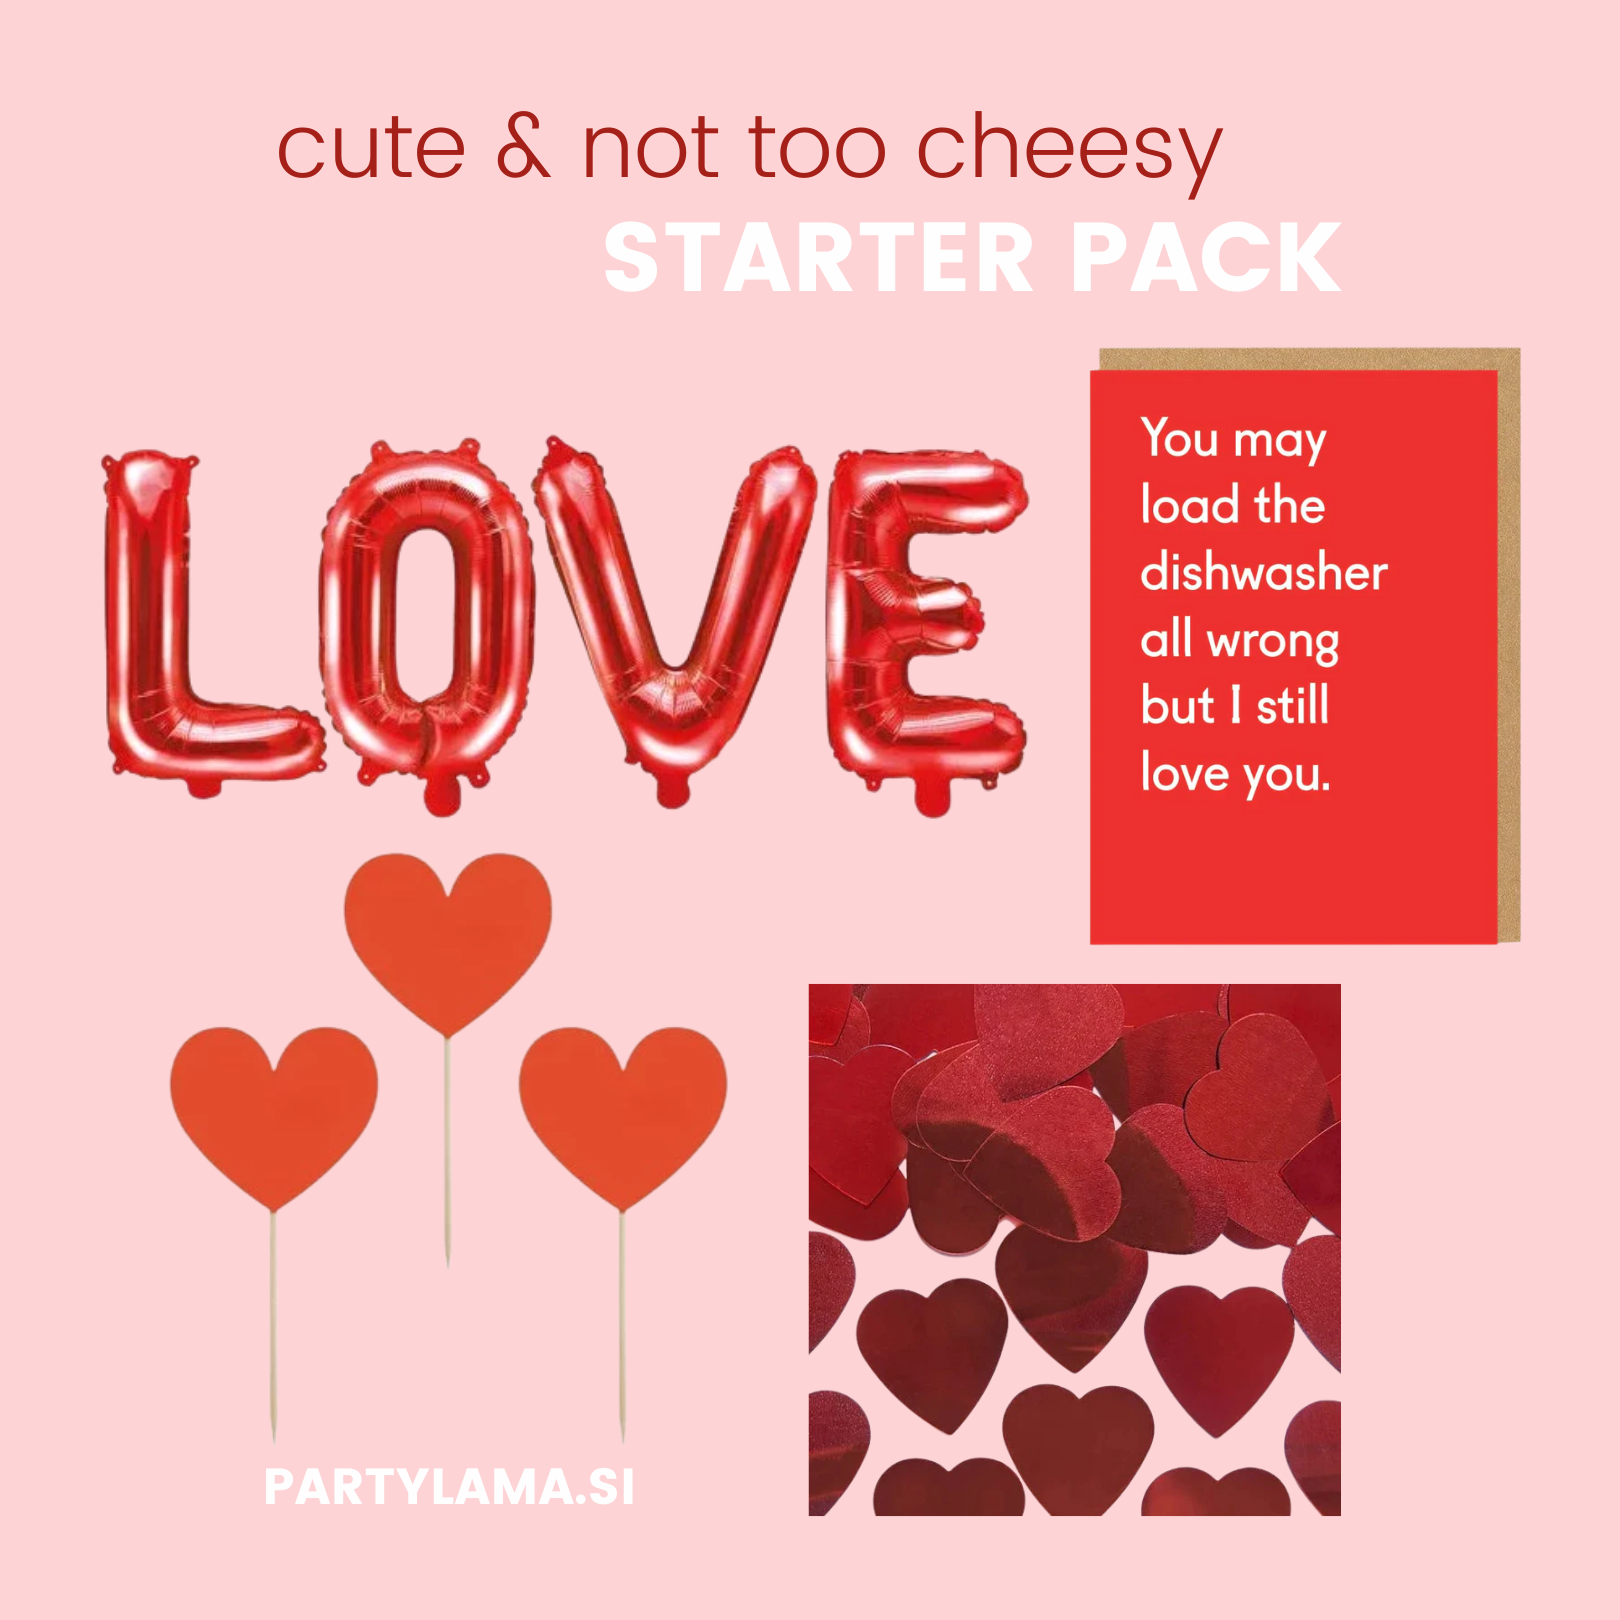 Cute & not too cheesy, starter pack